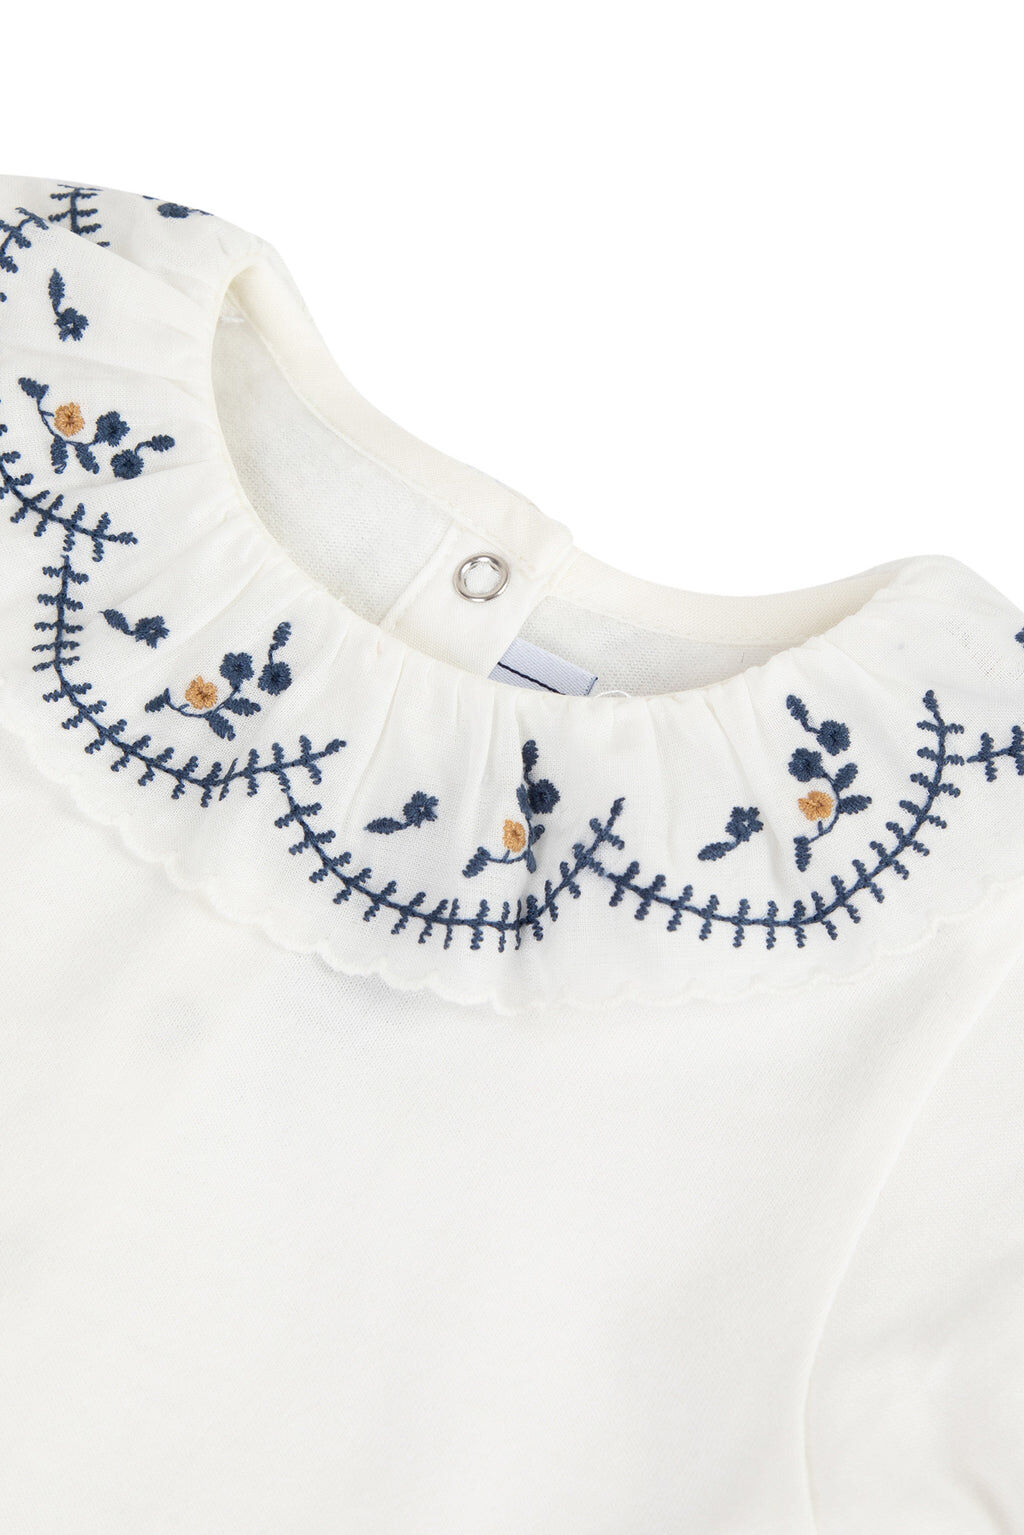 Body - Blue Collar Embrodery floral